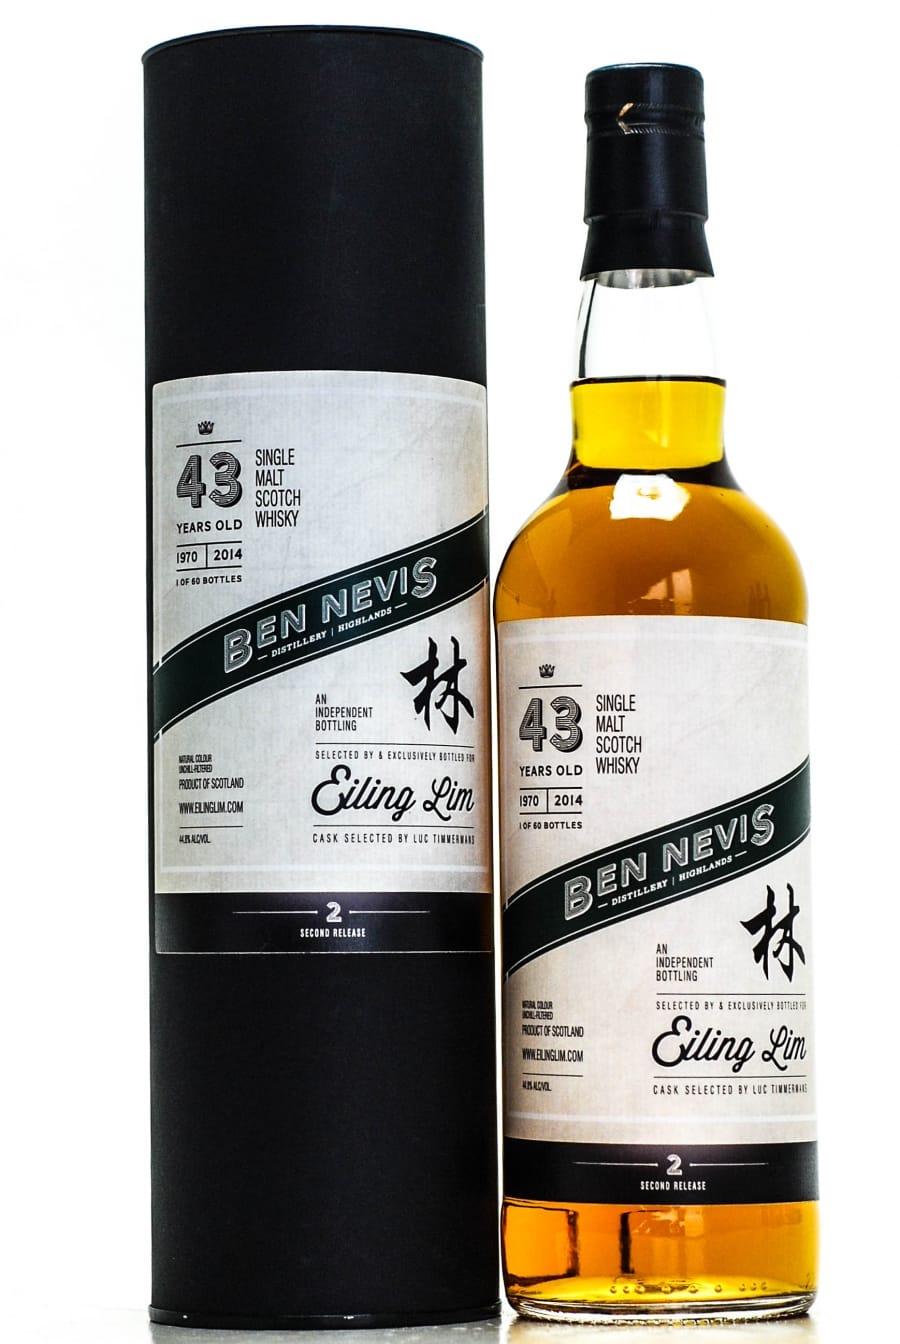 Ben Nevis - 43 Years Old Eiling Lim 2nd Release 1 of 60 bottles 44.8% 1970